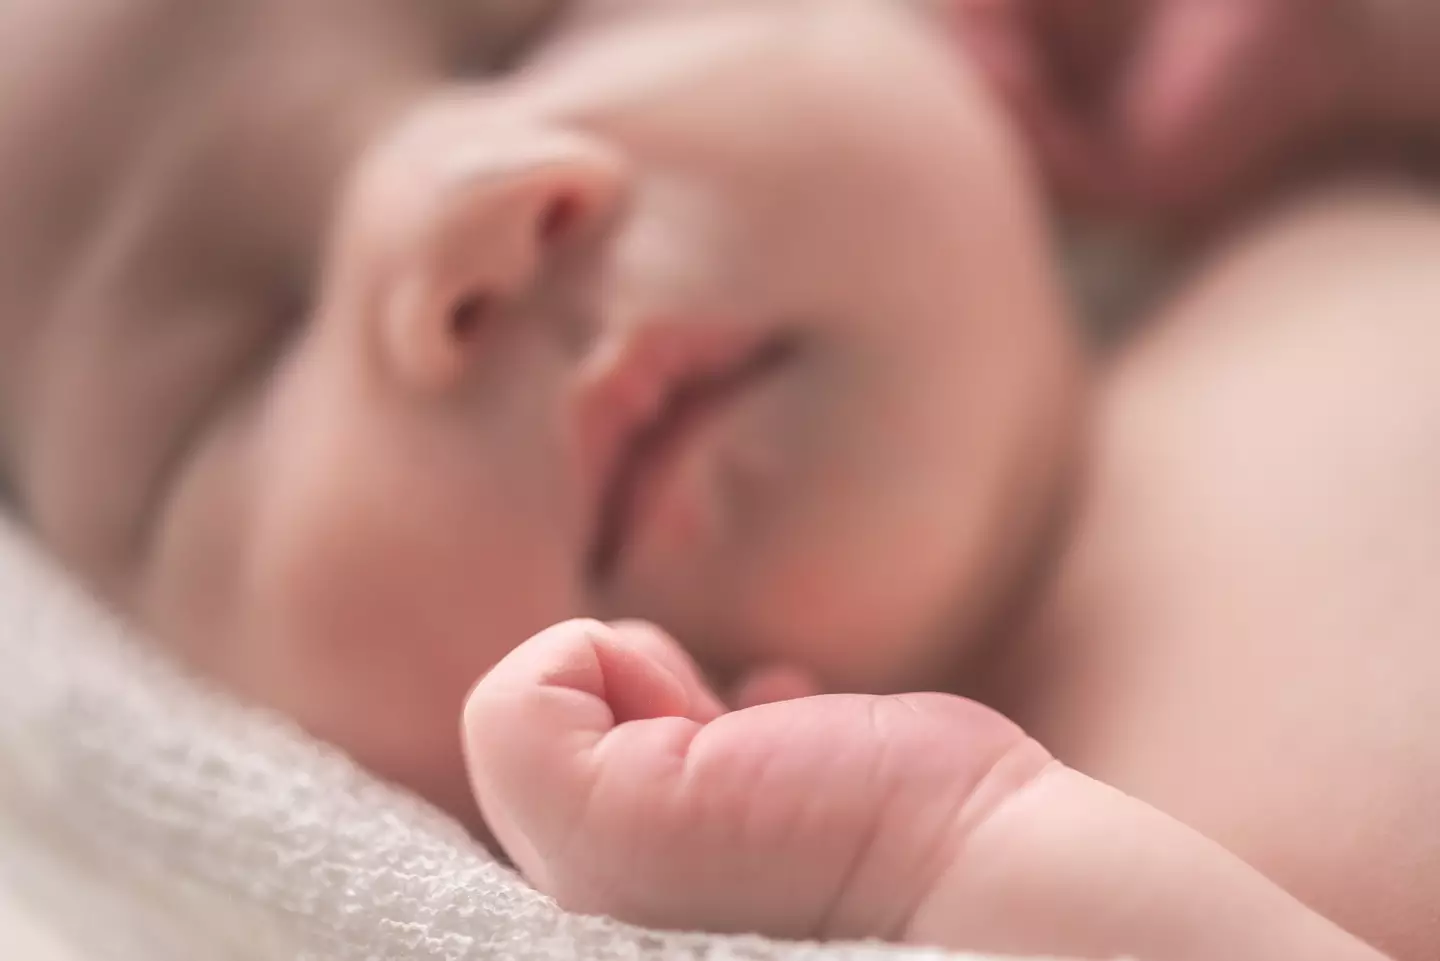 Urgent new advice has been issued to parents to prevent Sudden Infant Death Syndrome (SIDS).